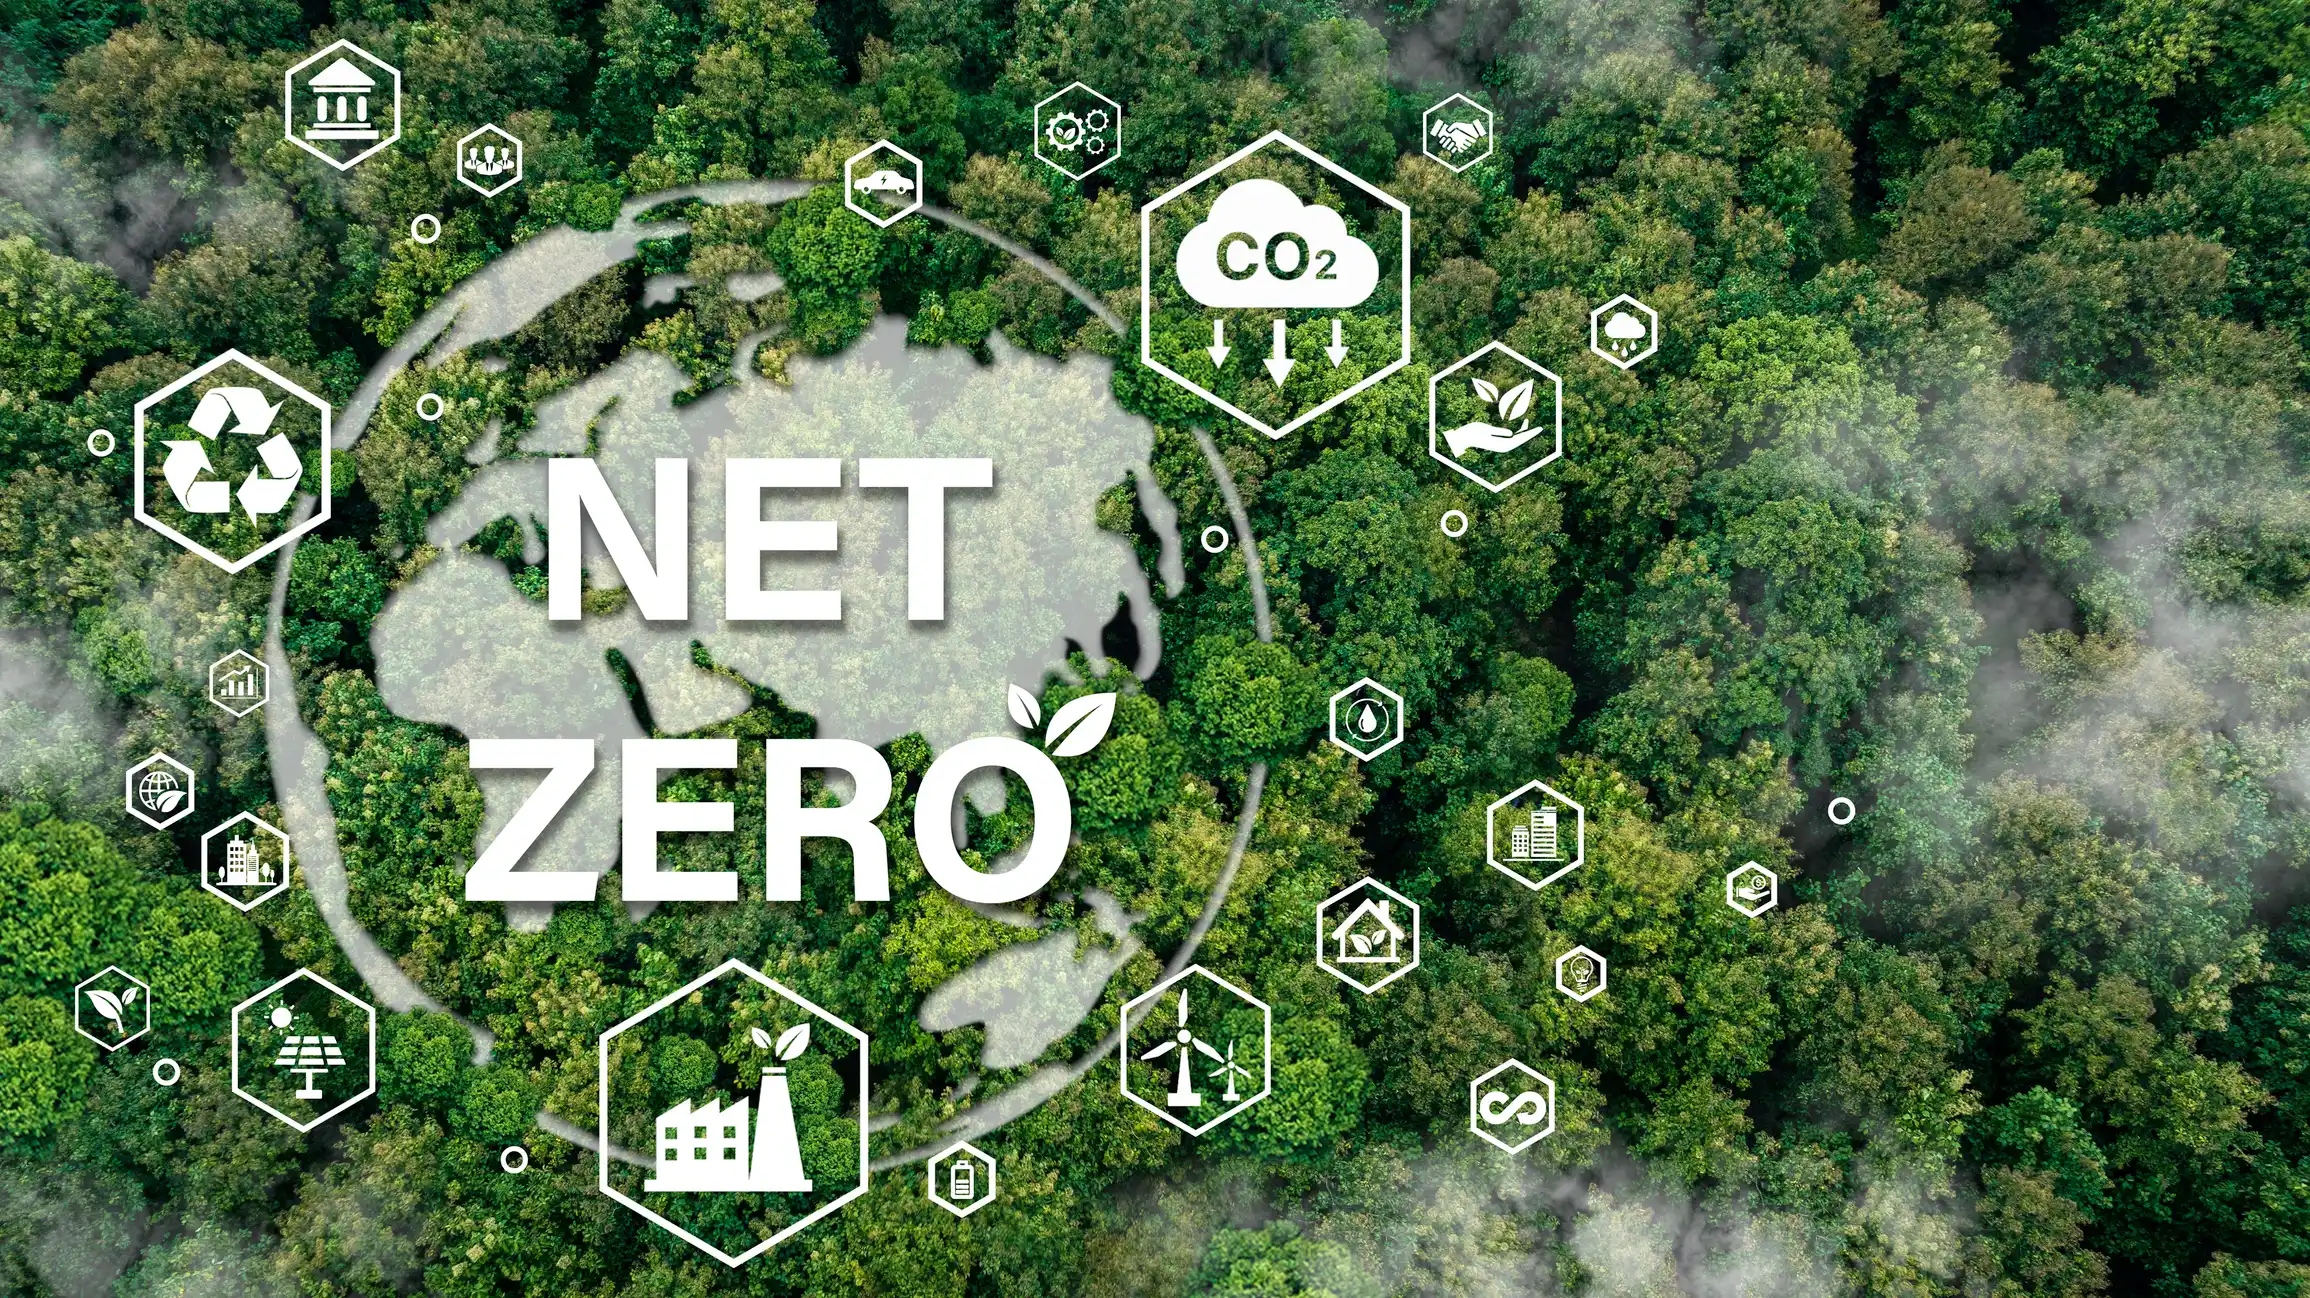 Net zero for a sustainable future.